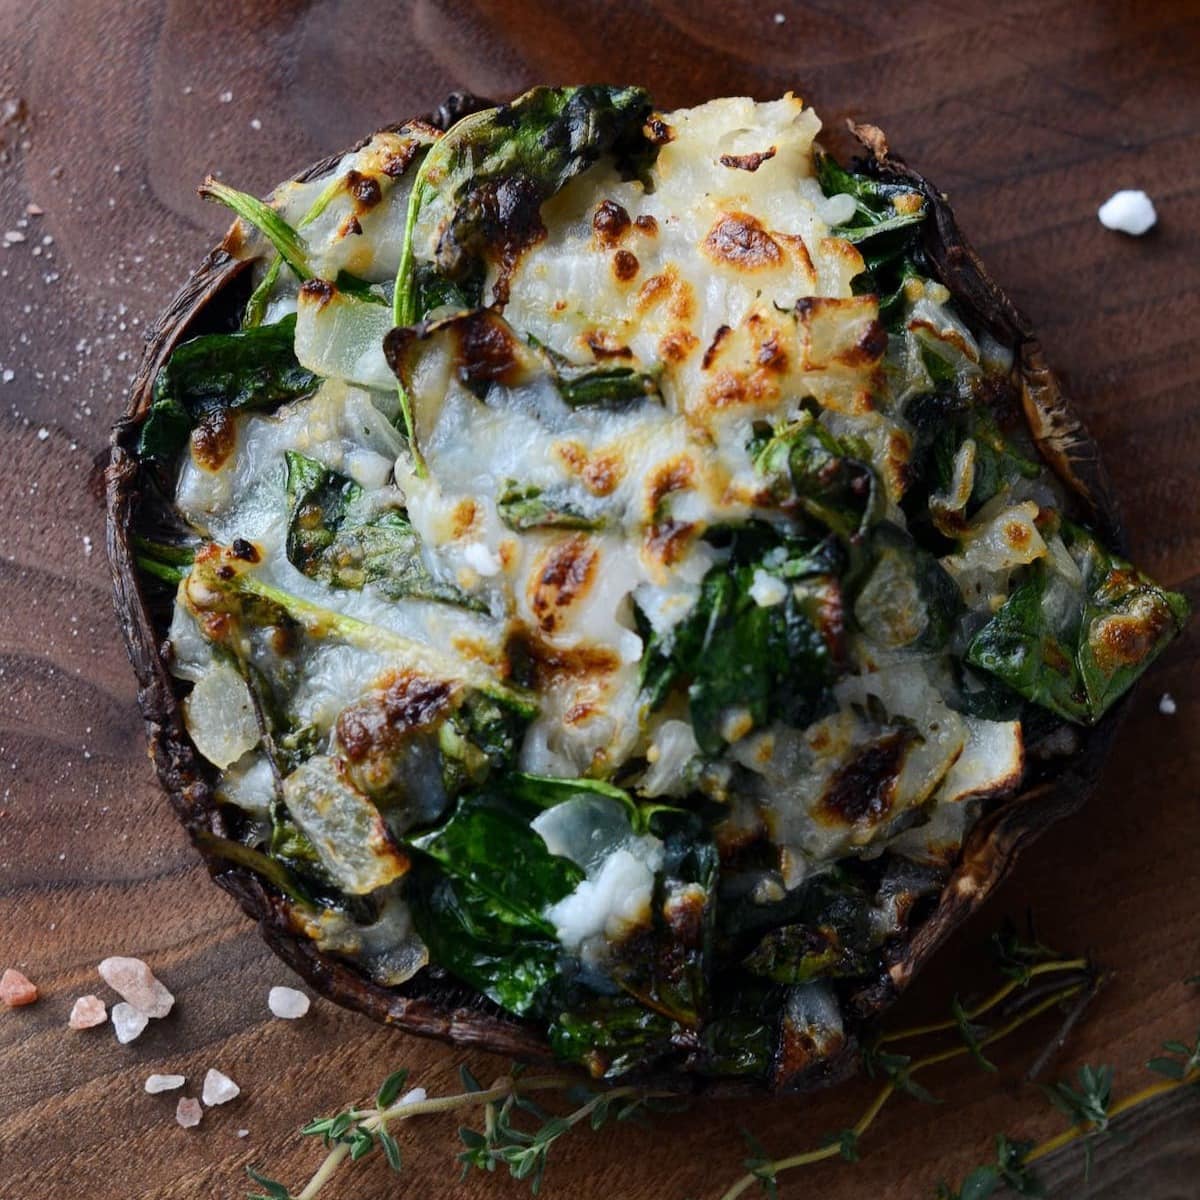 This is a photo of a stuffed mushroom. 